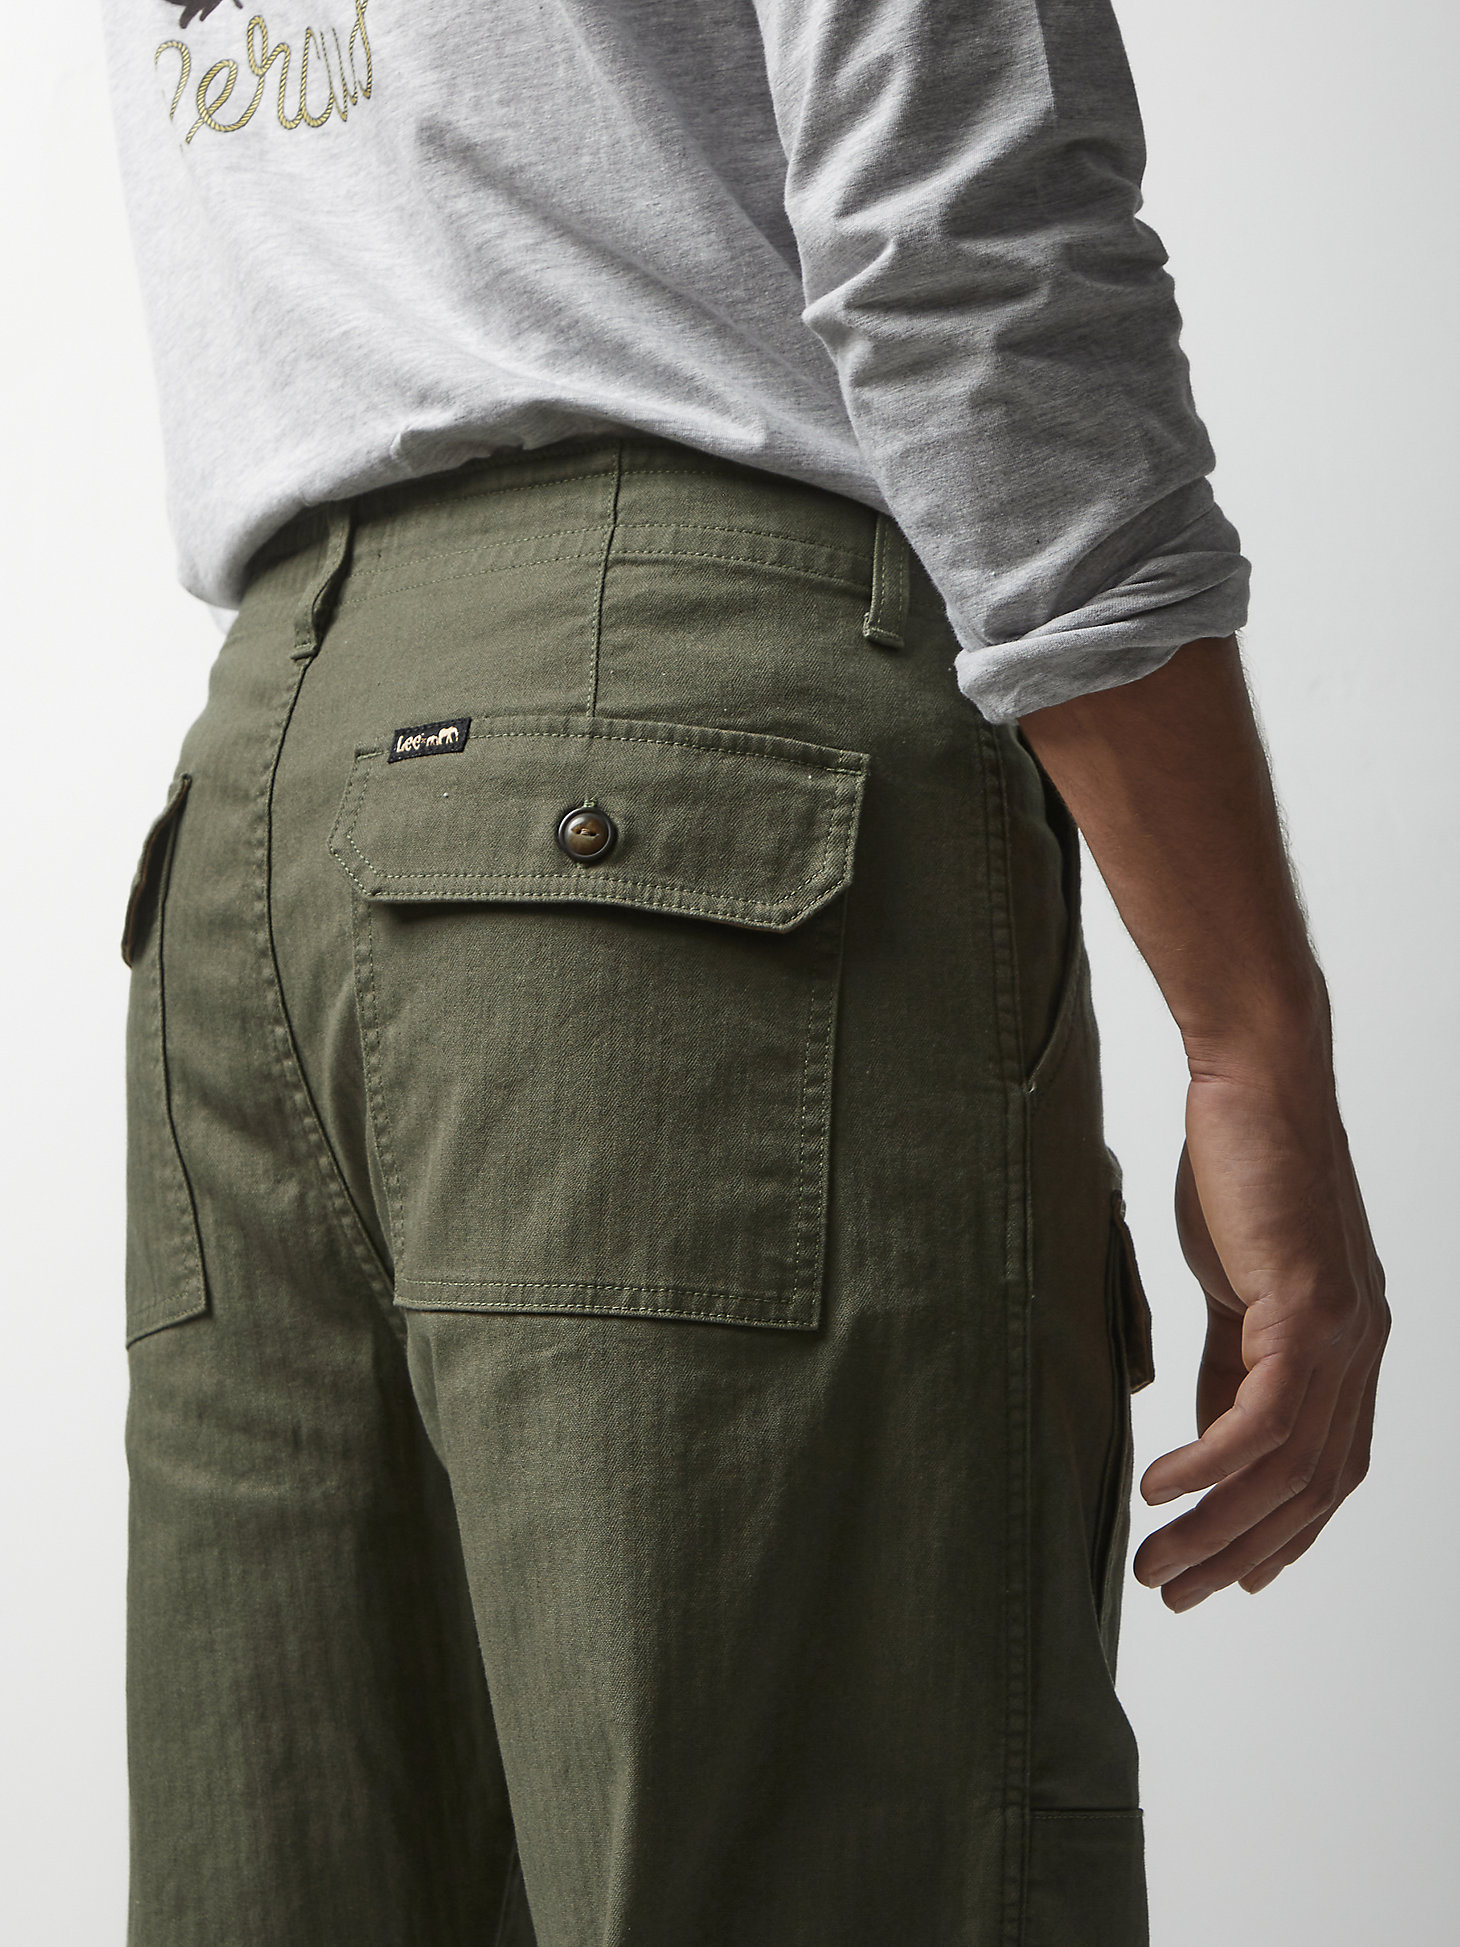 Lee® x The Brooklyn Circus® Drawstring Pant in Muted Olive alternative view 1